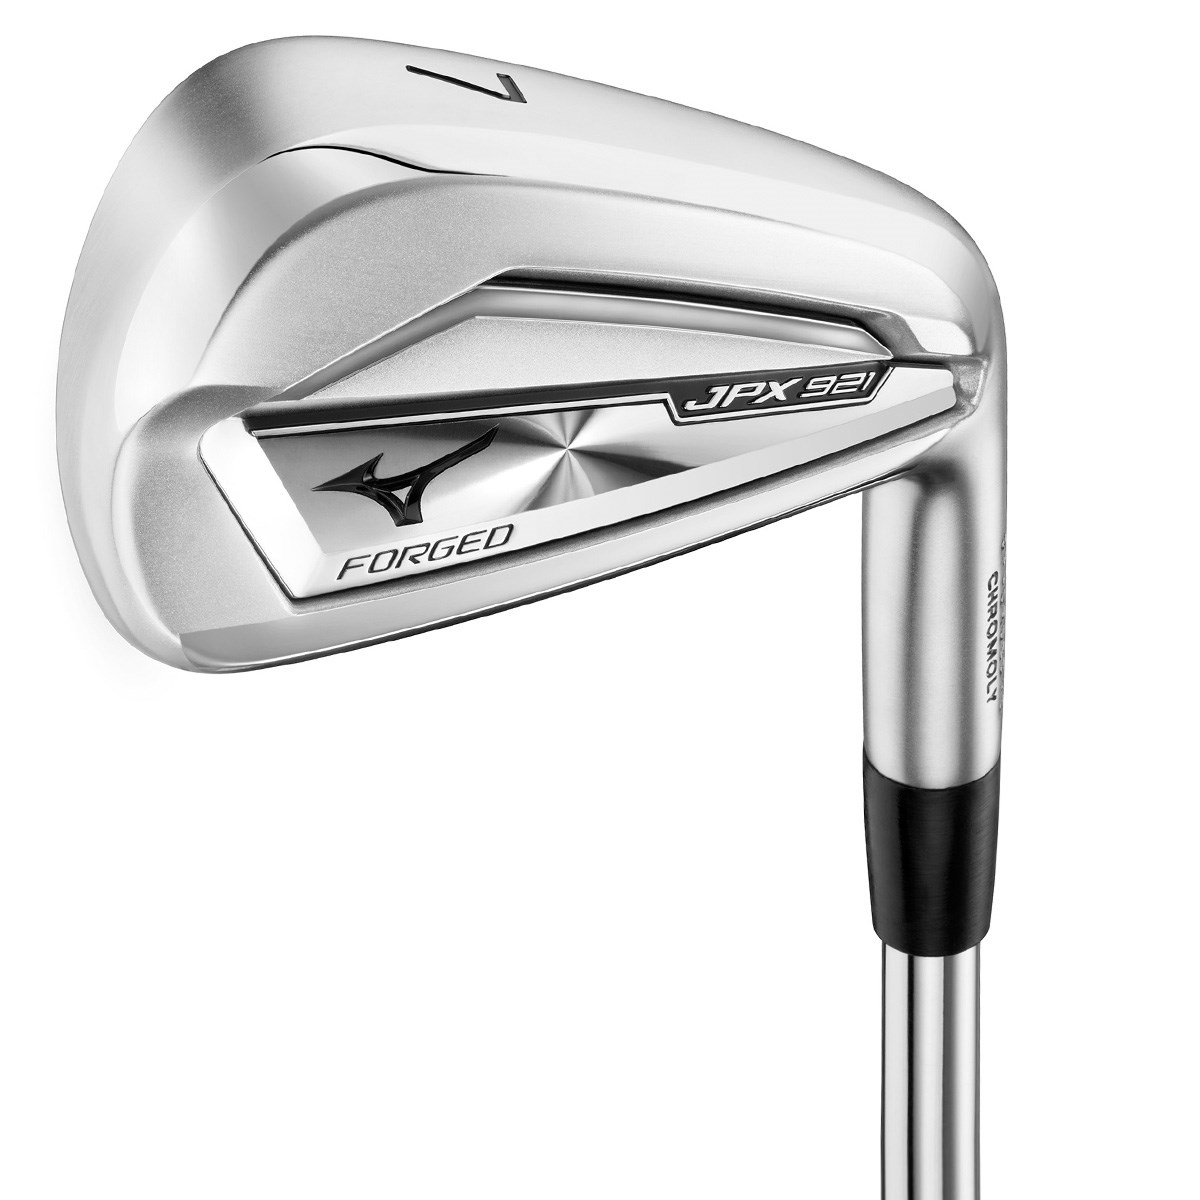 JPX921 FORGED アイアン(6本セット) N.S.PRO MODUS3 TOUR 105(アイアンセット)